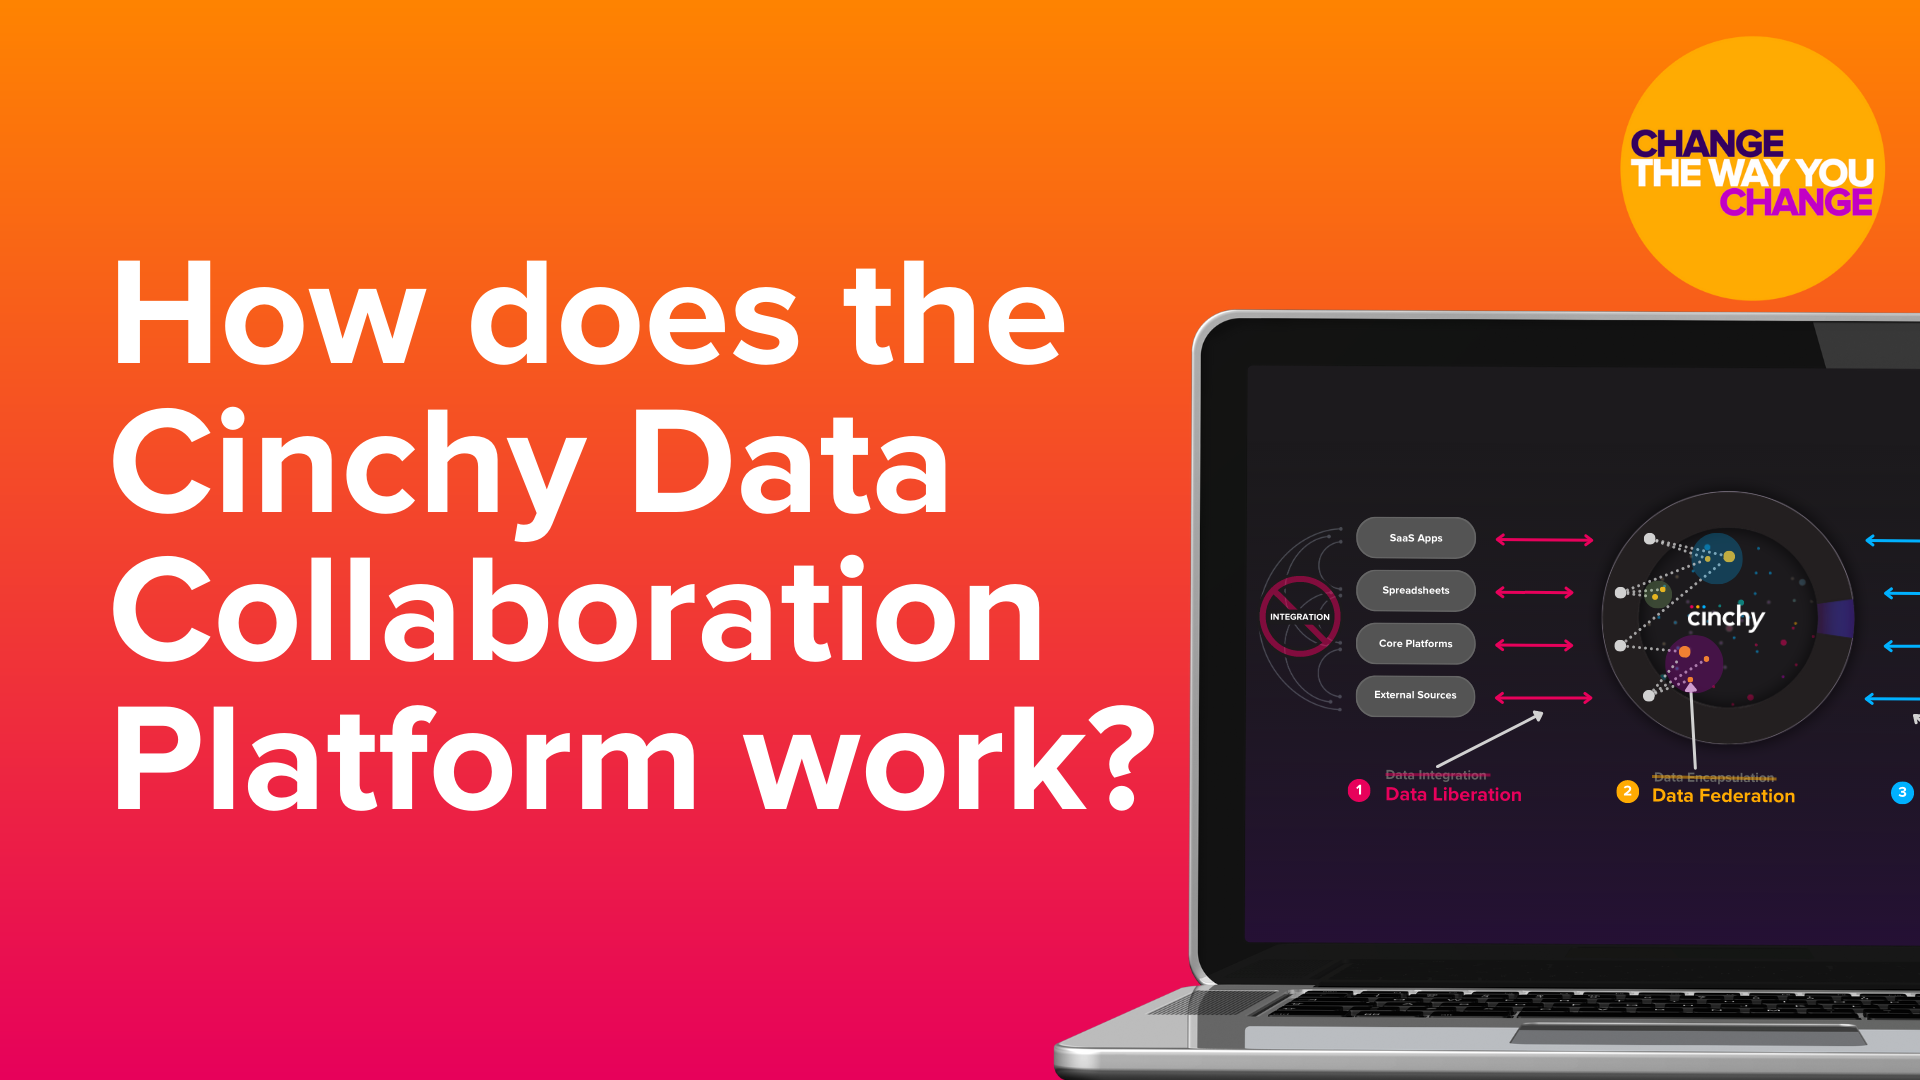 How Does The Cinchy Data Collaboration Platform Work?